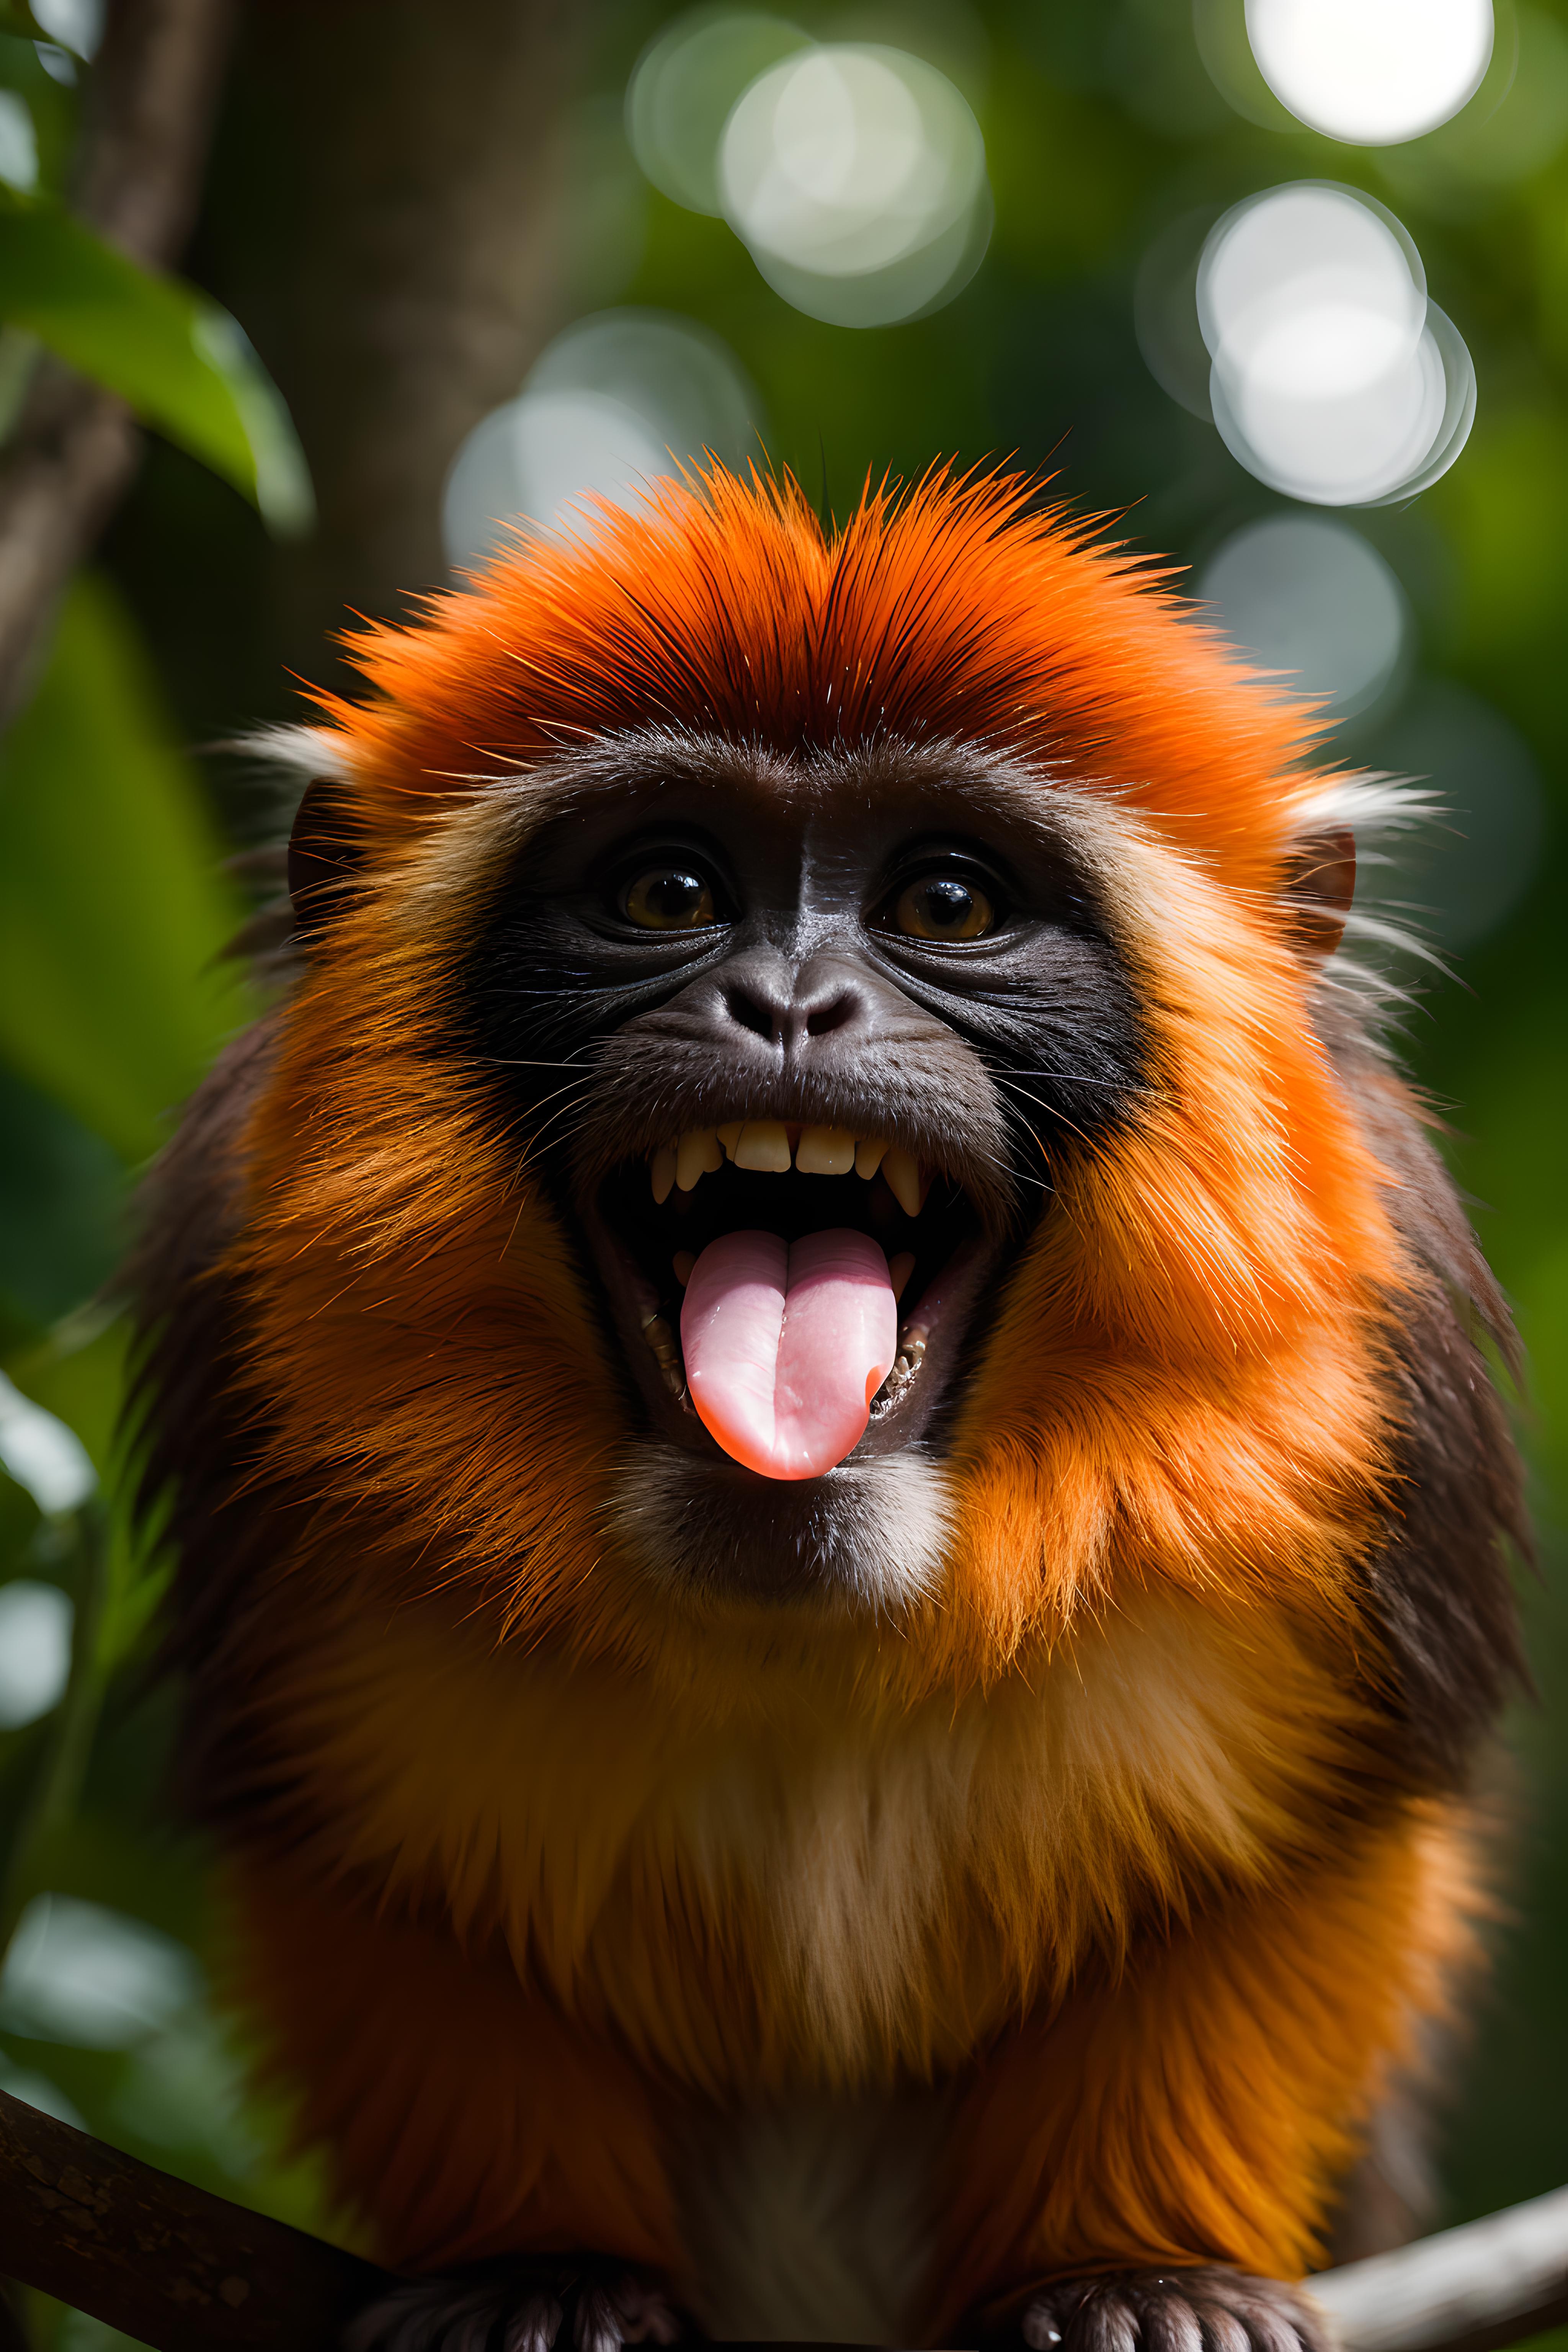 A close-up of a monkey with its mouth open in a jungle setting.